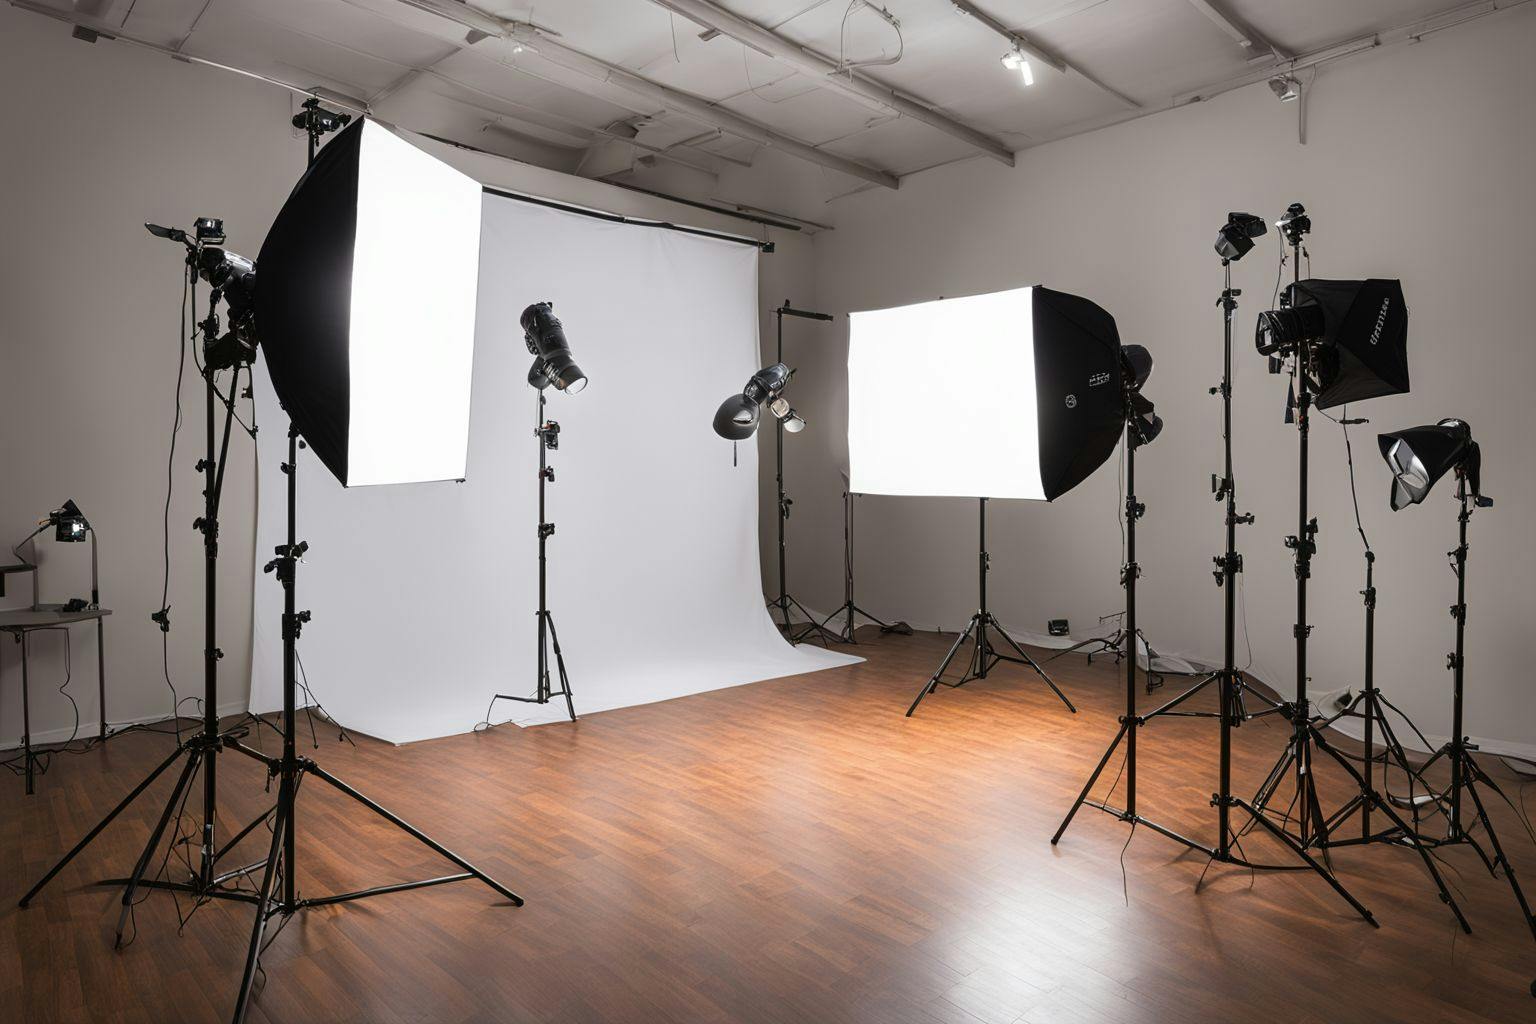 A studio set up demonstrating expert lighting techniques for headshots, captured with a wide-angle lens, showing soft lights, reflectors, and diffusers in action.